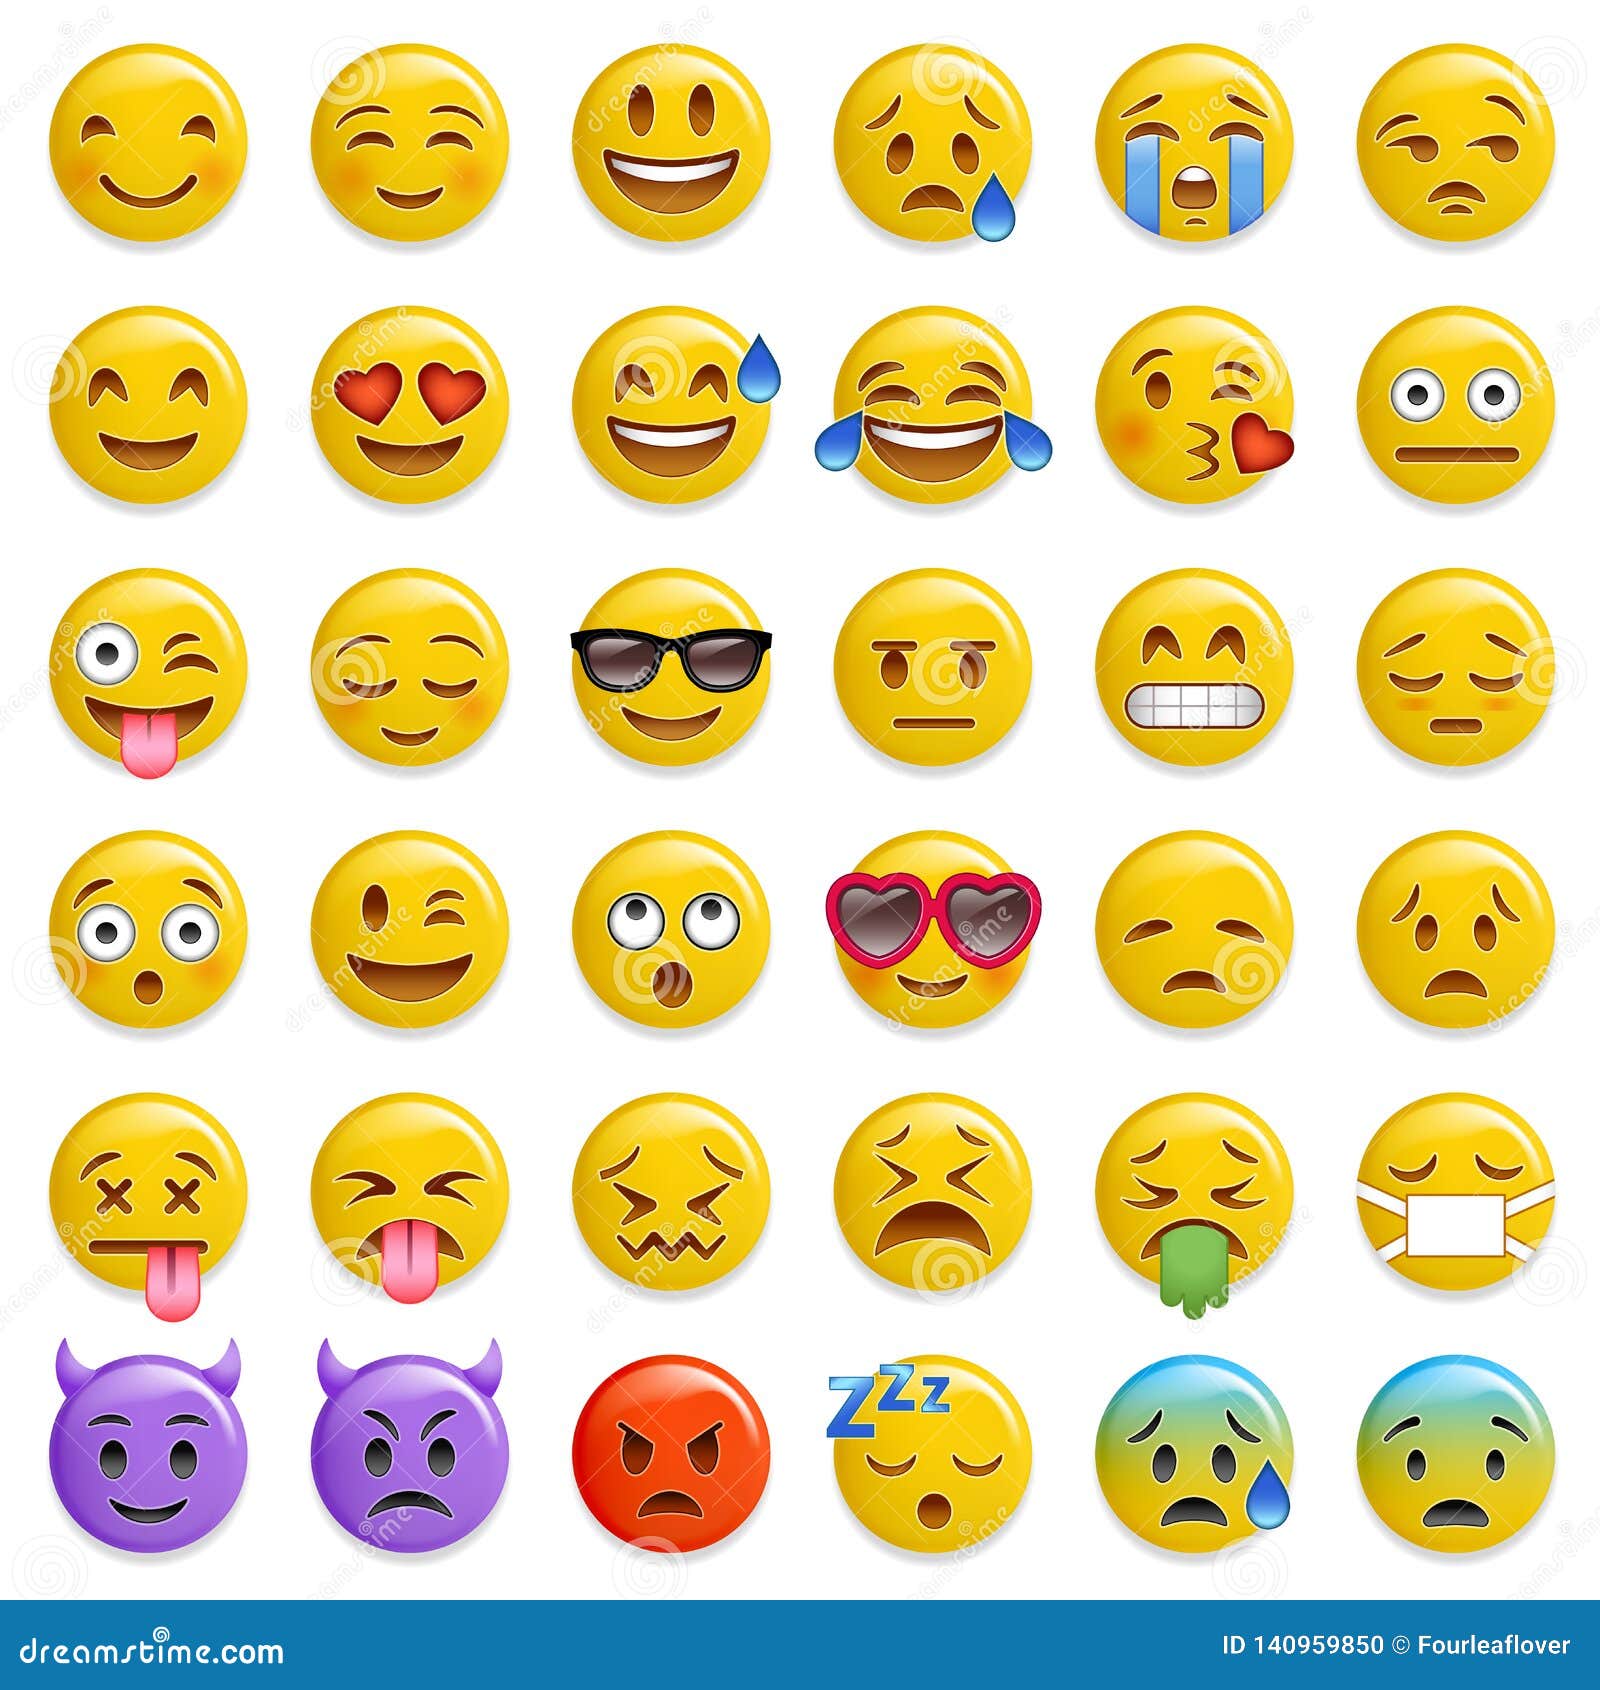 Smiley Emoticon Glossy Vector Set Stock Vector - Illustration of face ...